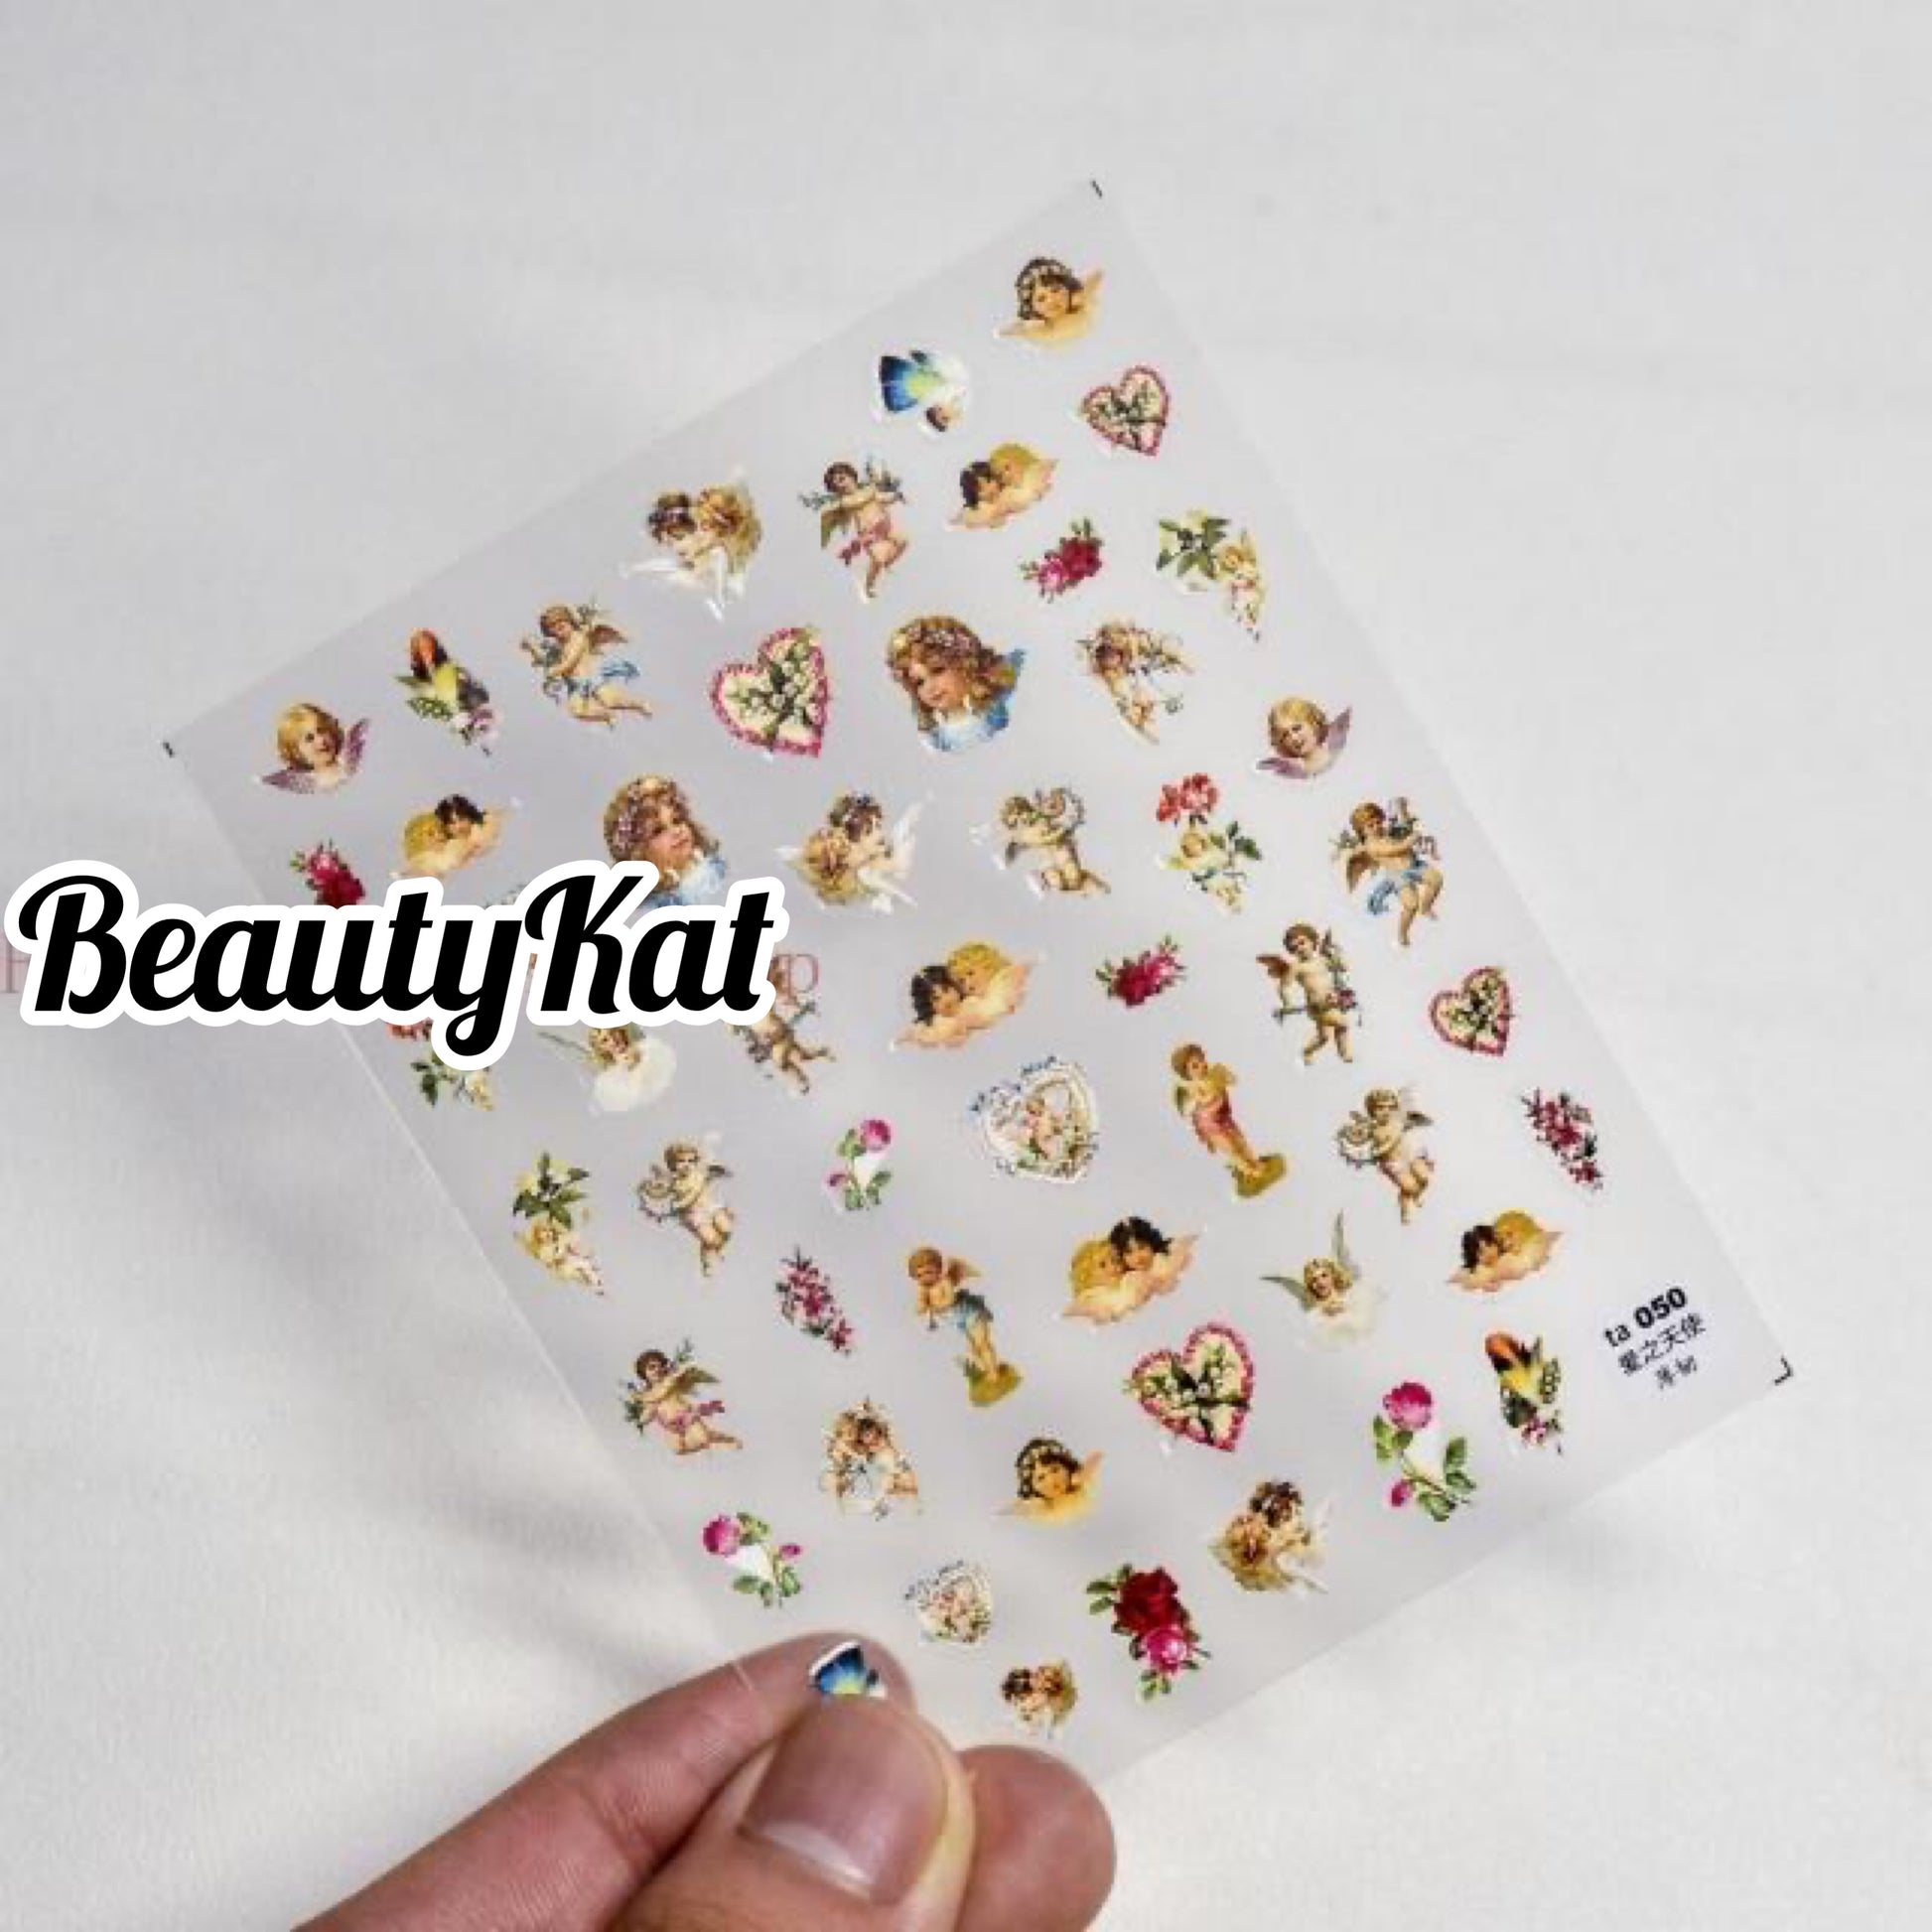  1 sheet 3D Embossed Rococo Head Nail Art Sticker Decal Decorations in Various Types (2 wks SHIP).